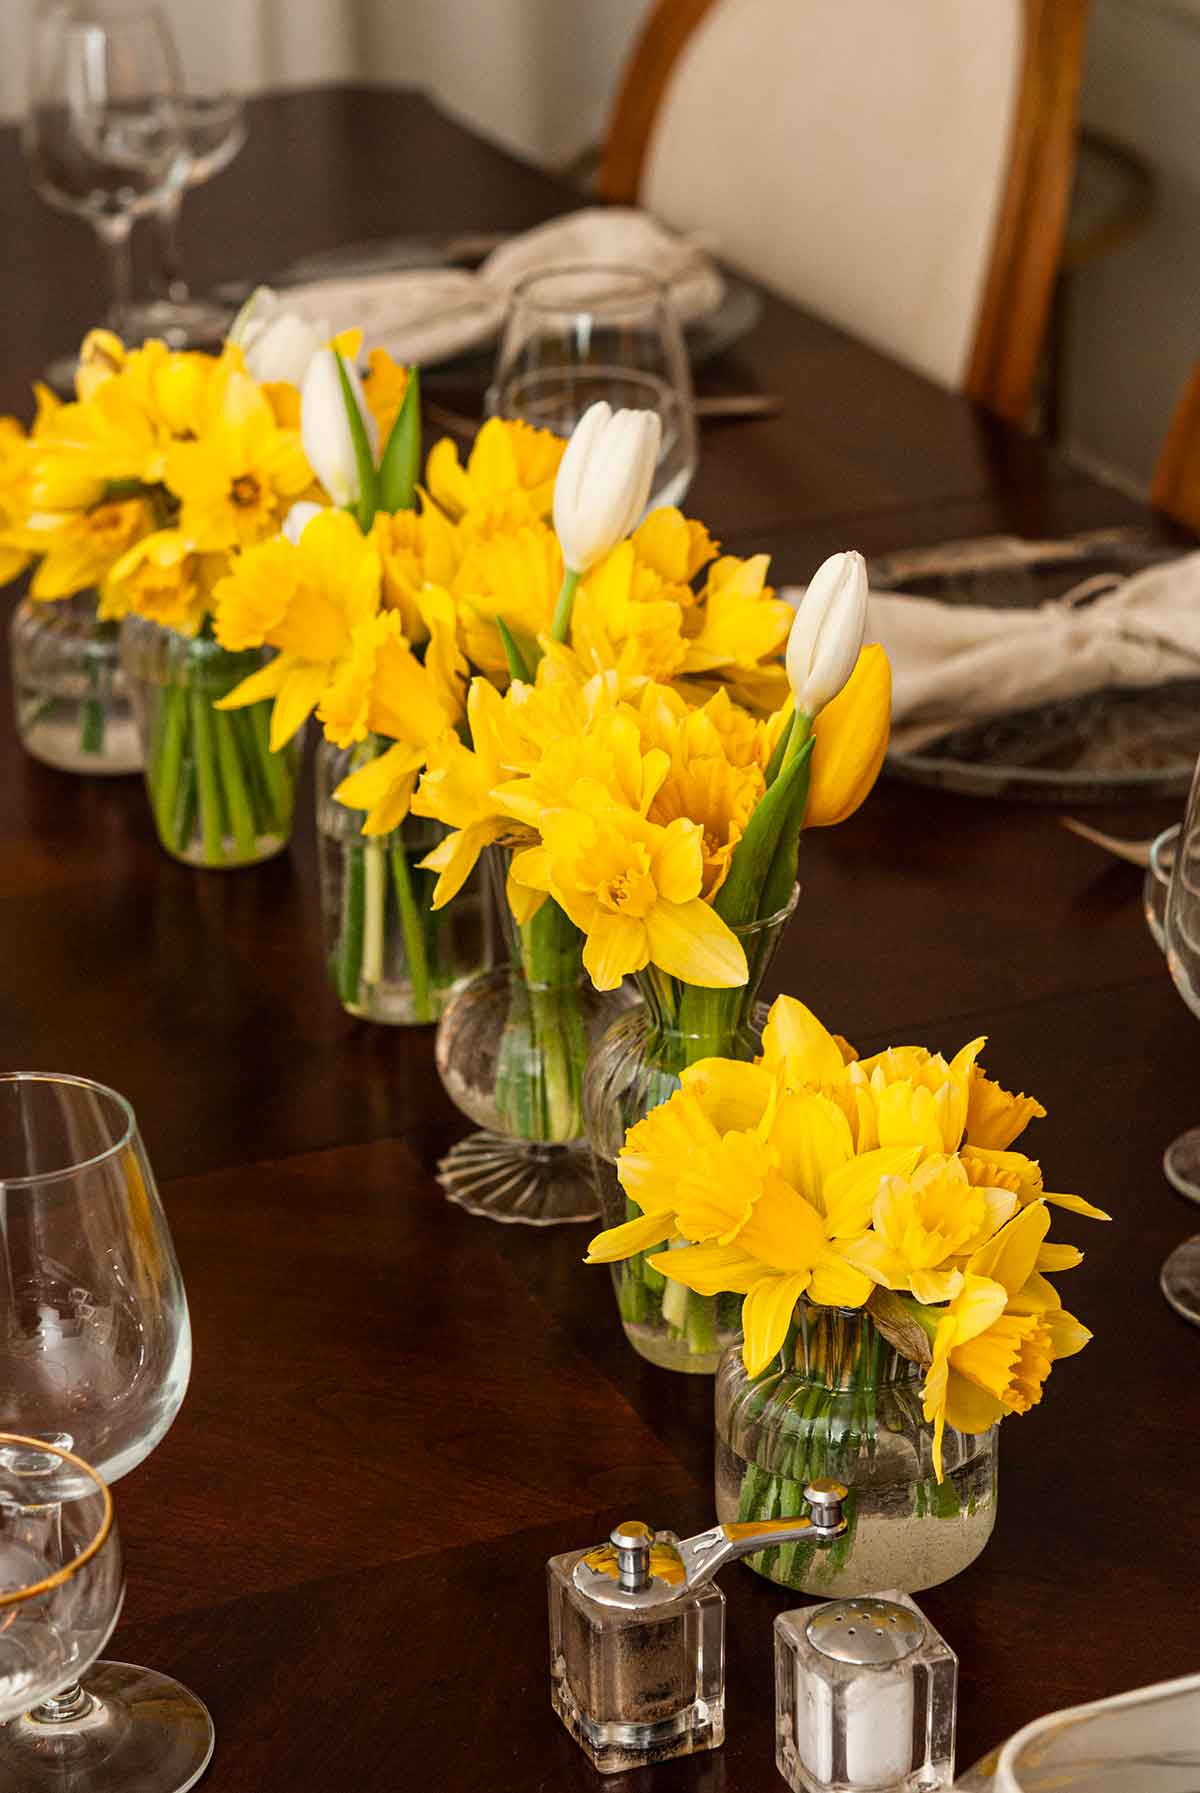 A row of daffodils in glass vases on a diner table.